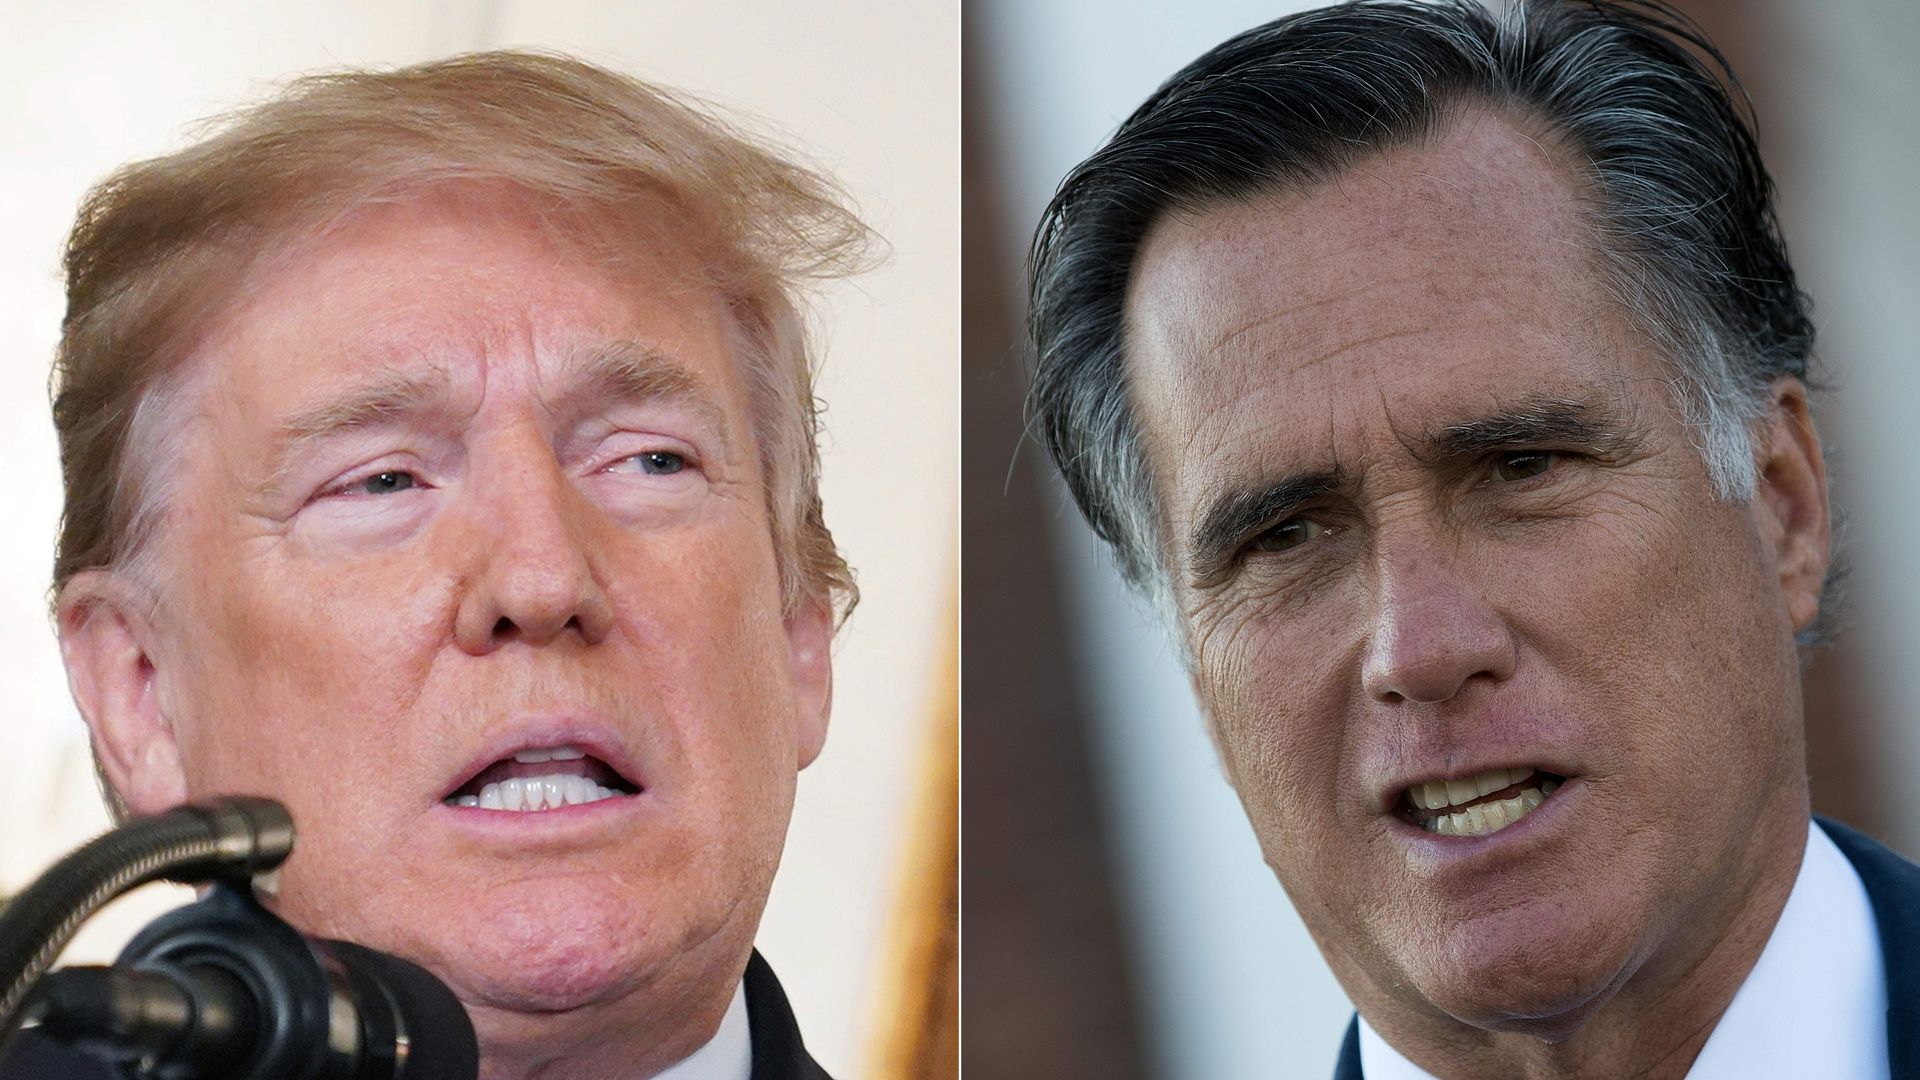 President Trump hit back at Mitt Romney for criticizing him over the Mueller report.